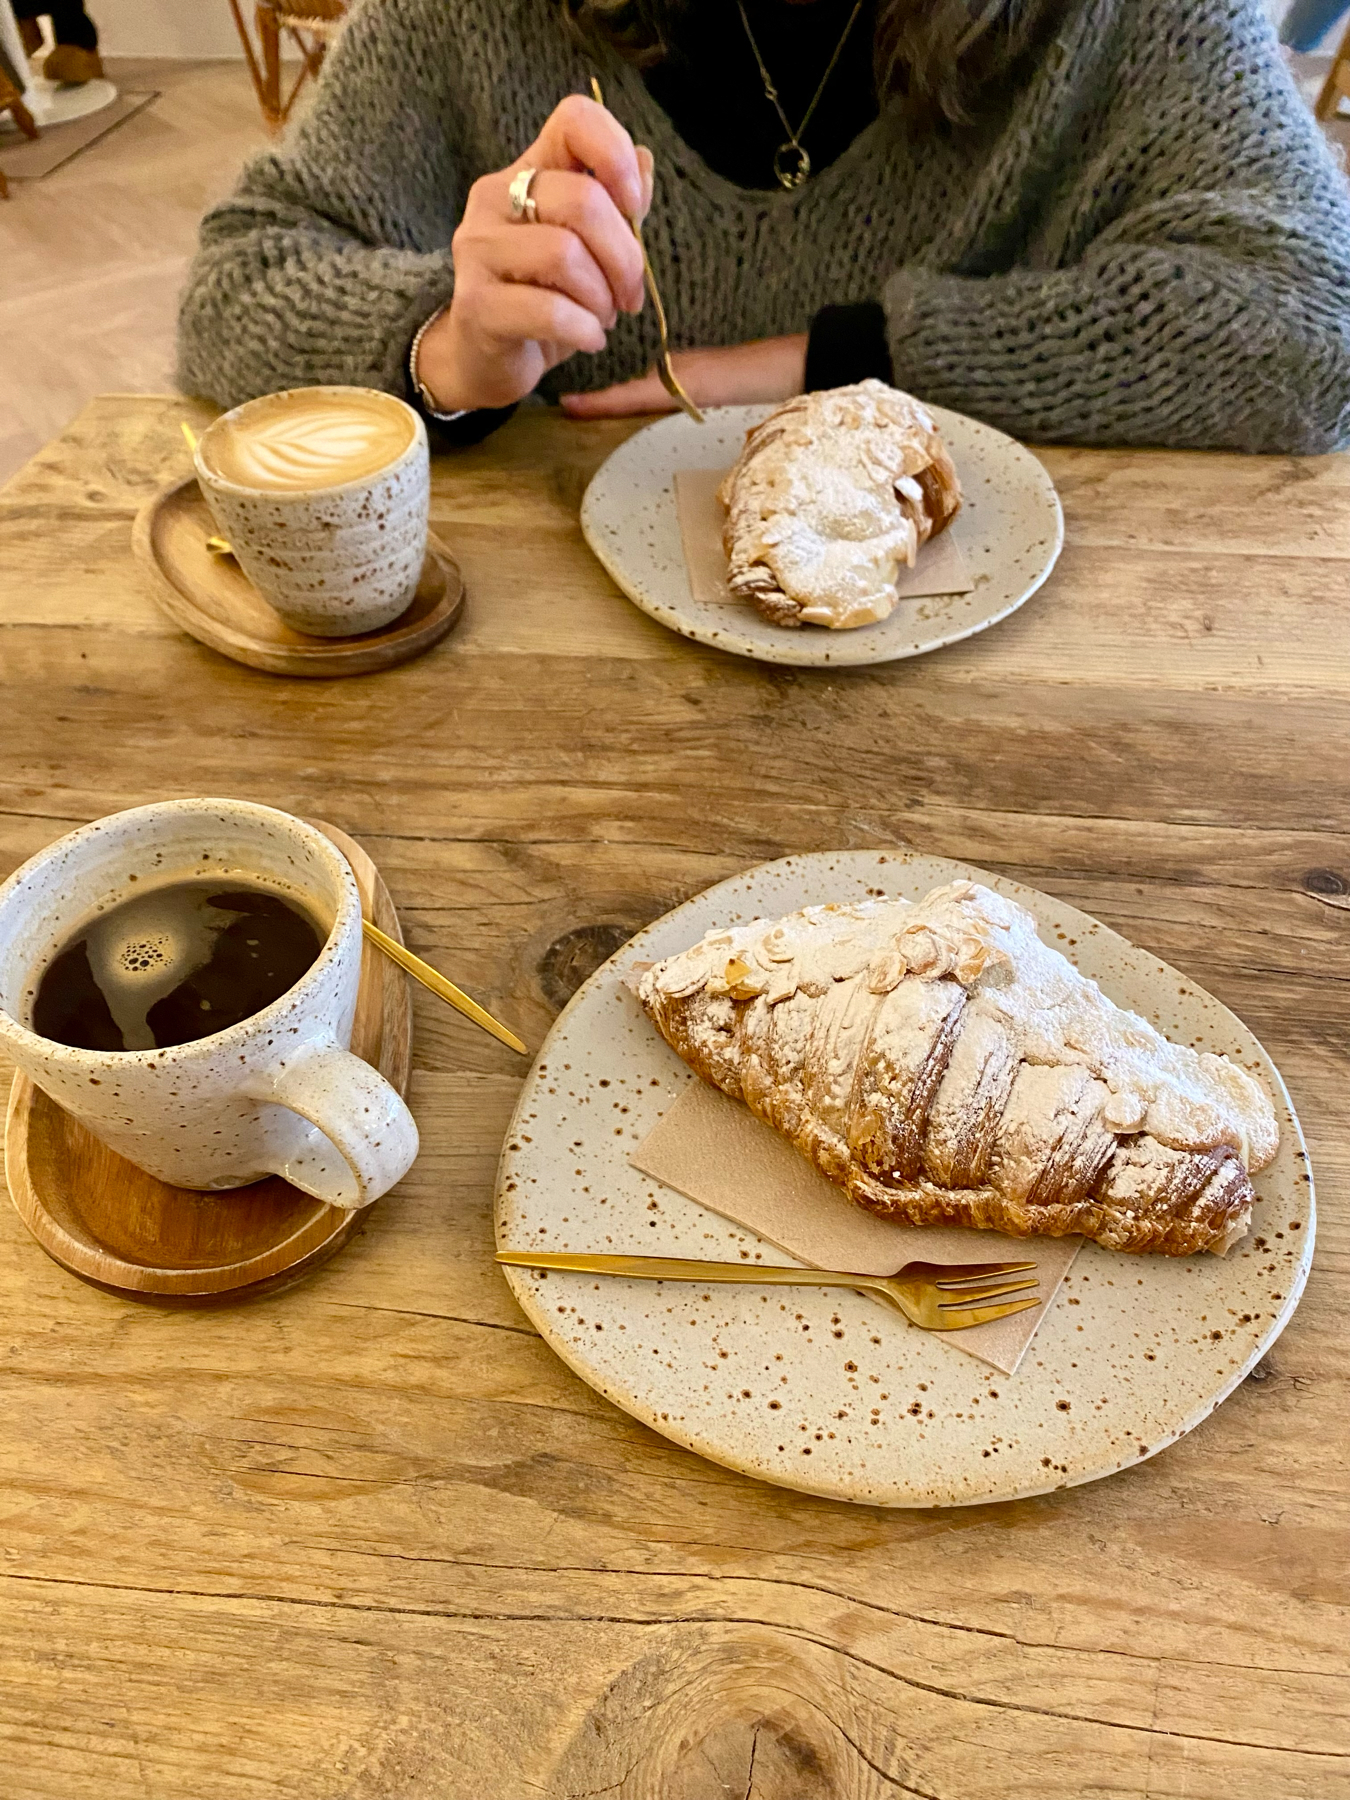 A person seated at a wooden table enjoying a coffee and pastries, including a frothy cappuccino and a dusted almond croissant.